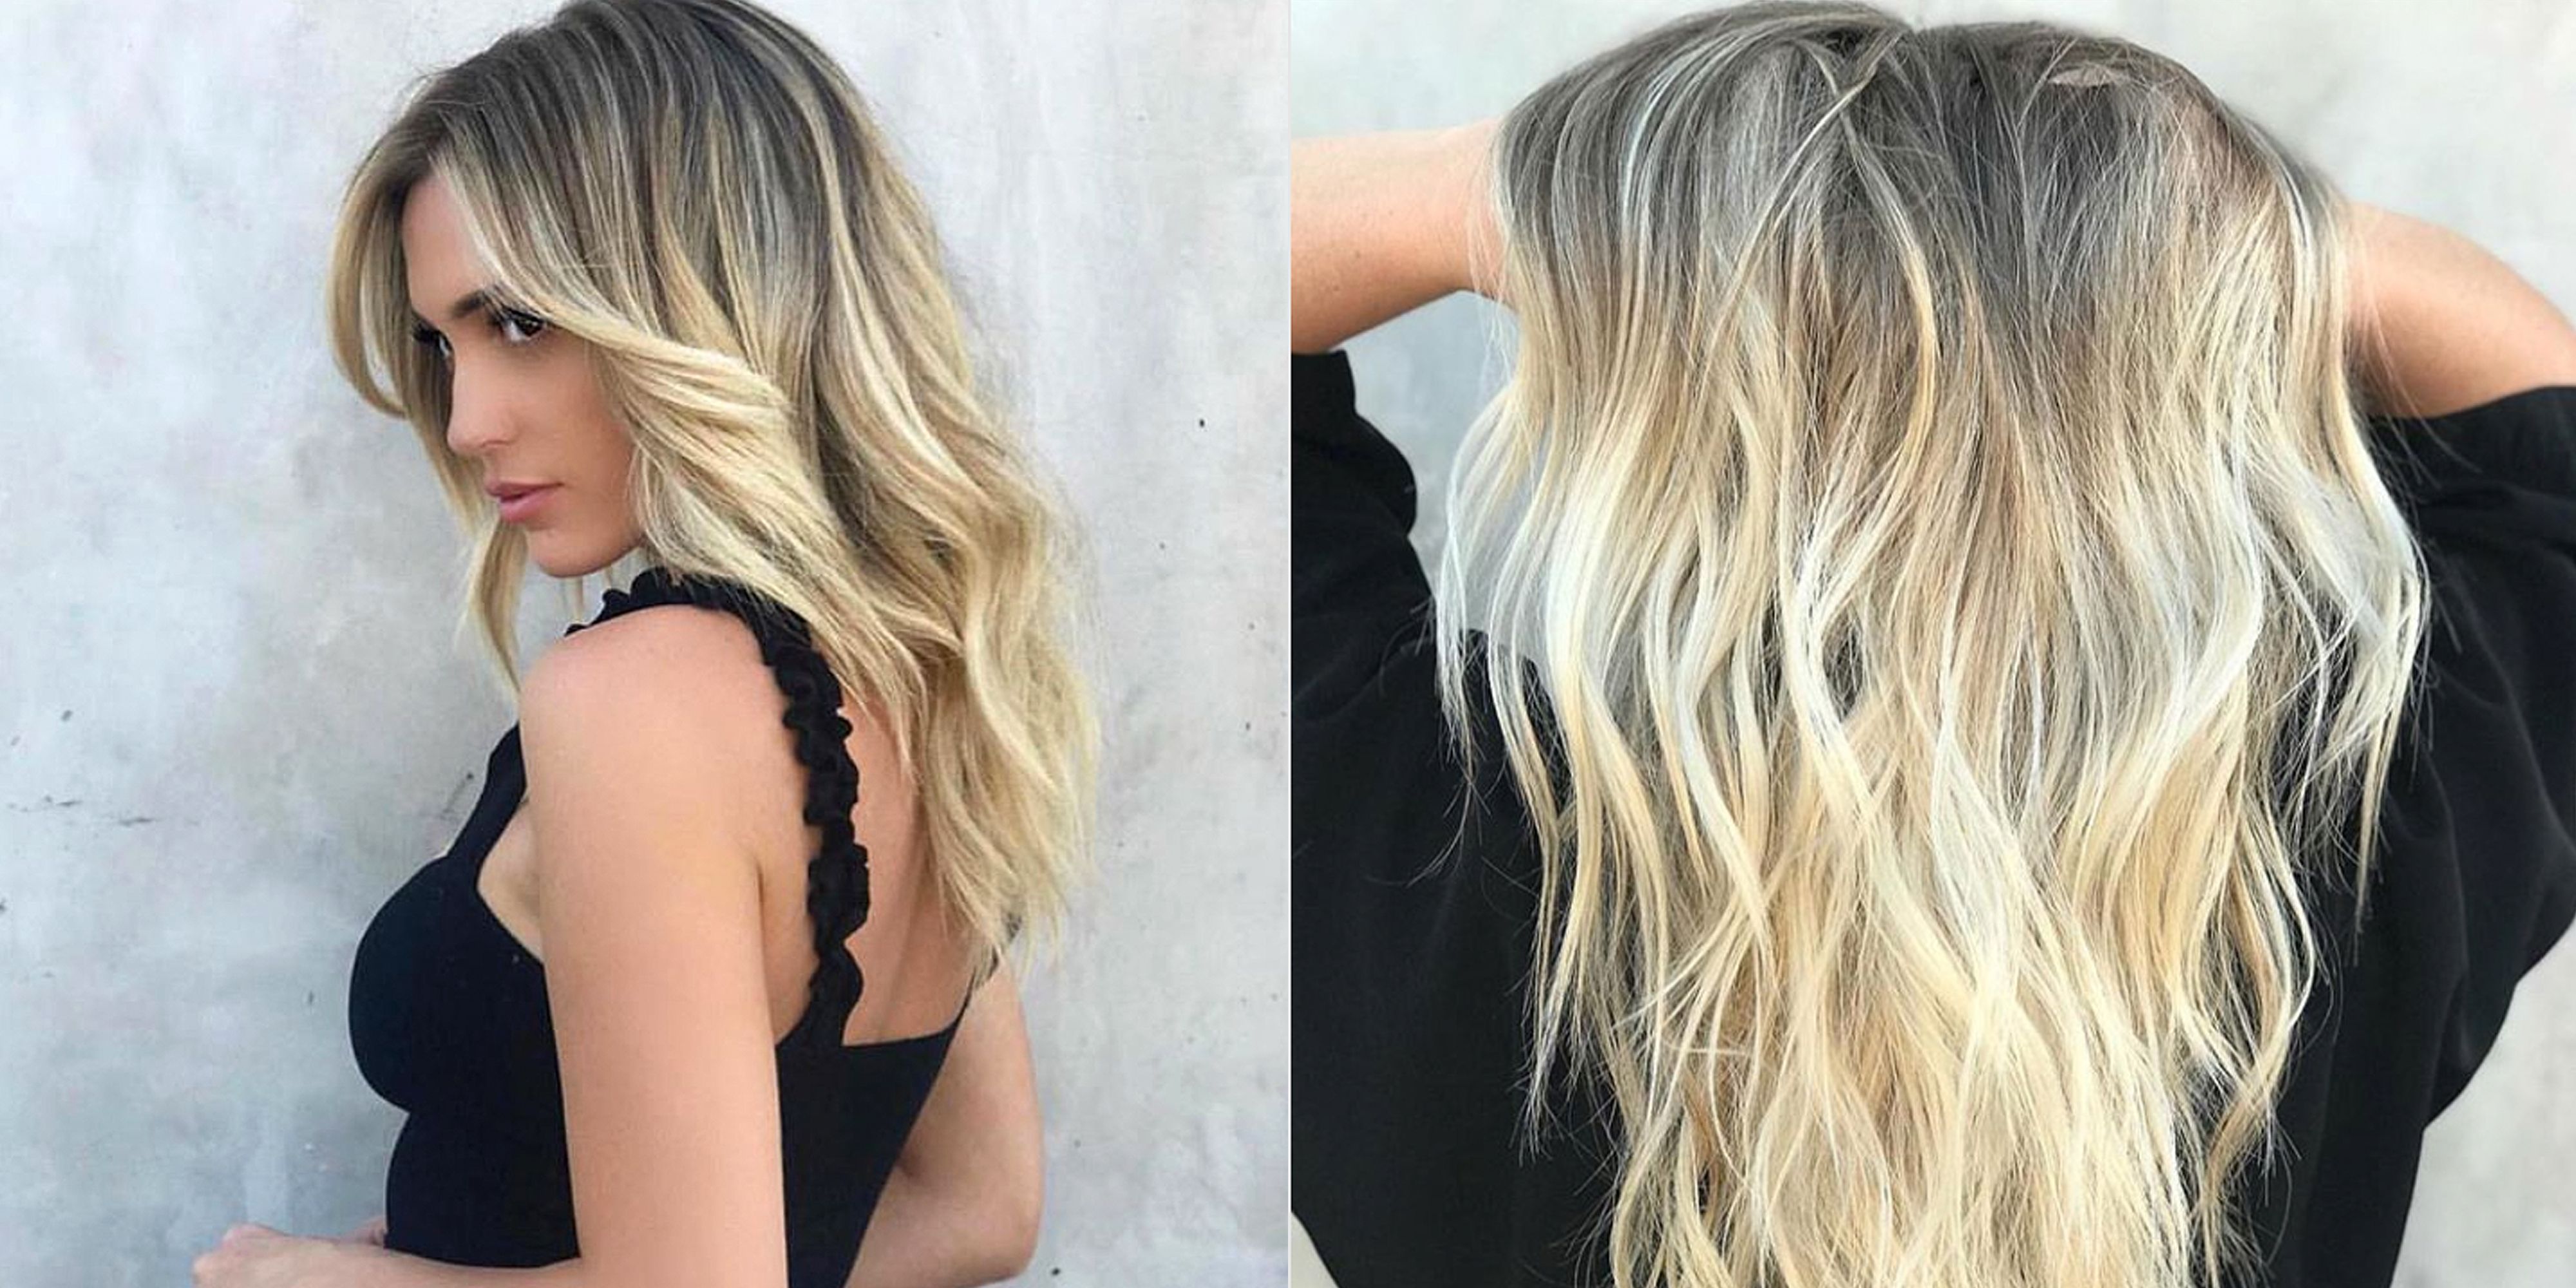 Balayage And Ombre Hair Color Techniques Explained What Are